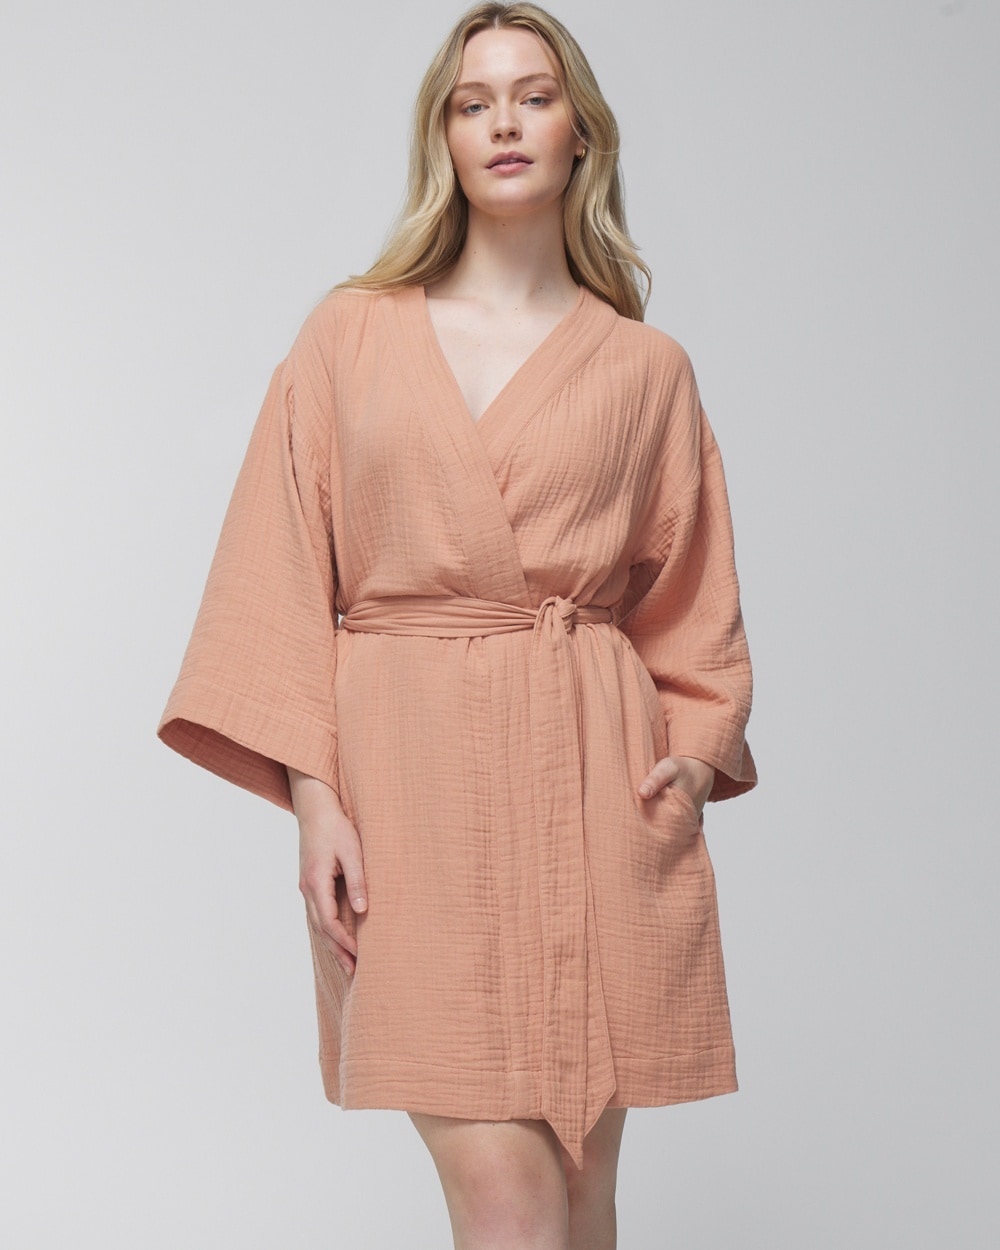 Soma Women's Textured Cotton Robe In Nude Size 2xl |  In Creme Brulee